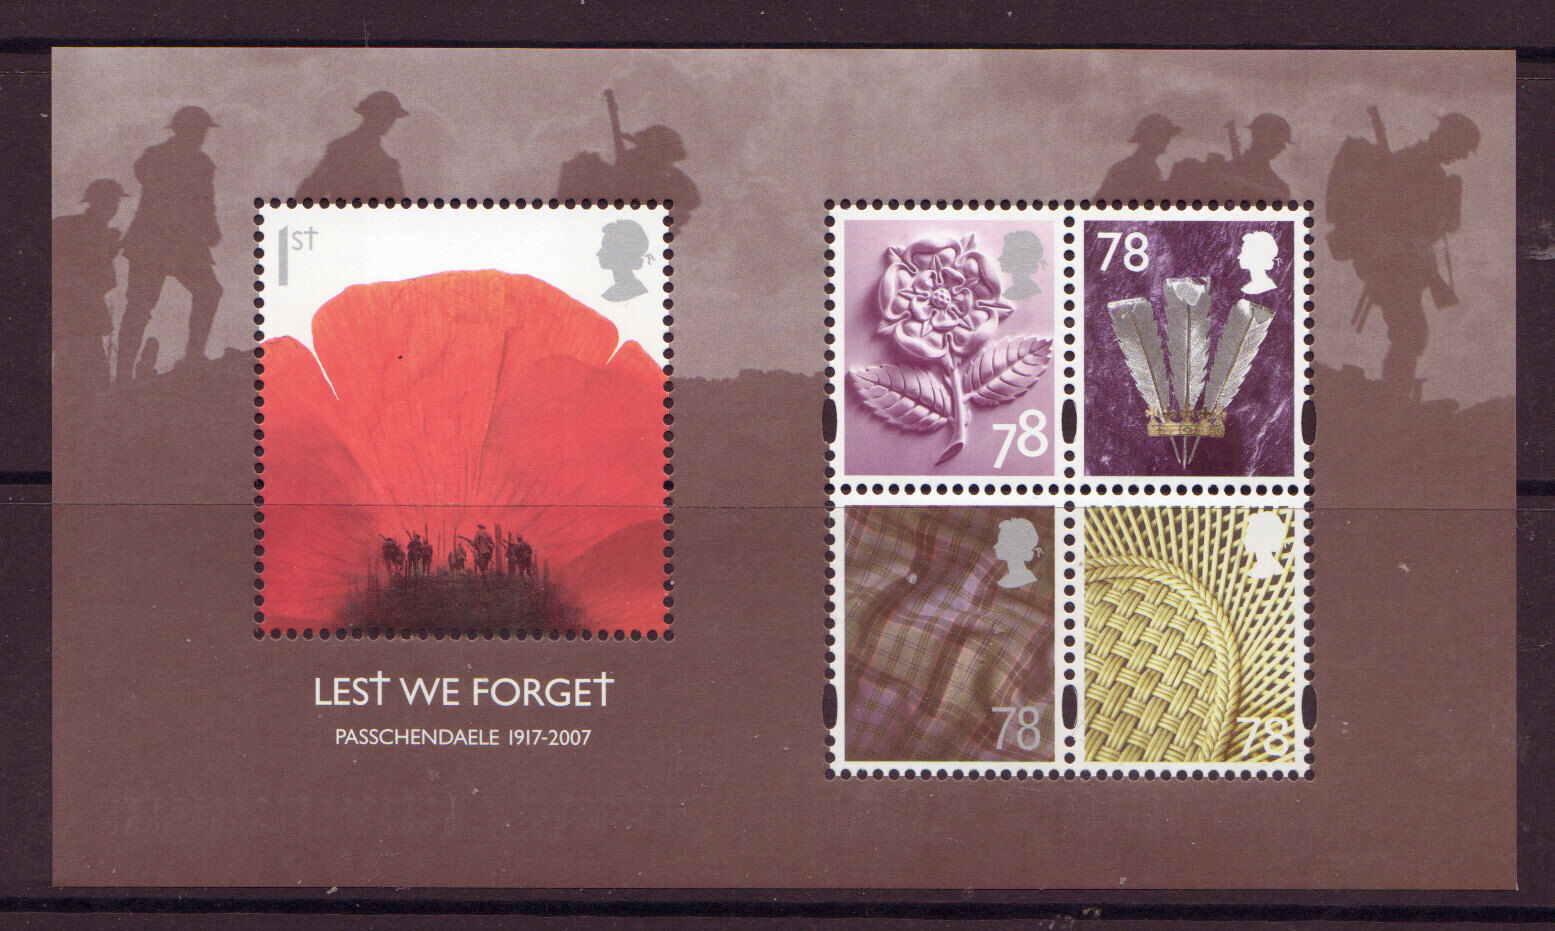 GREAT BRITAIN 2007 NEW ISSUE LEST WE FORGET M/SHEET UNMOUNTED MINT